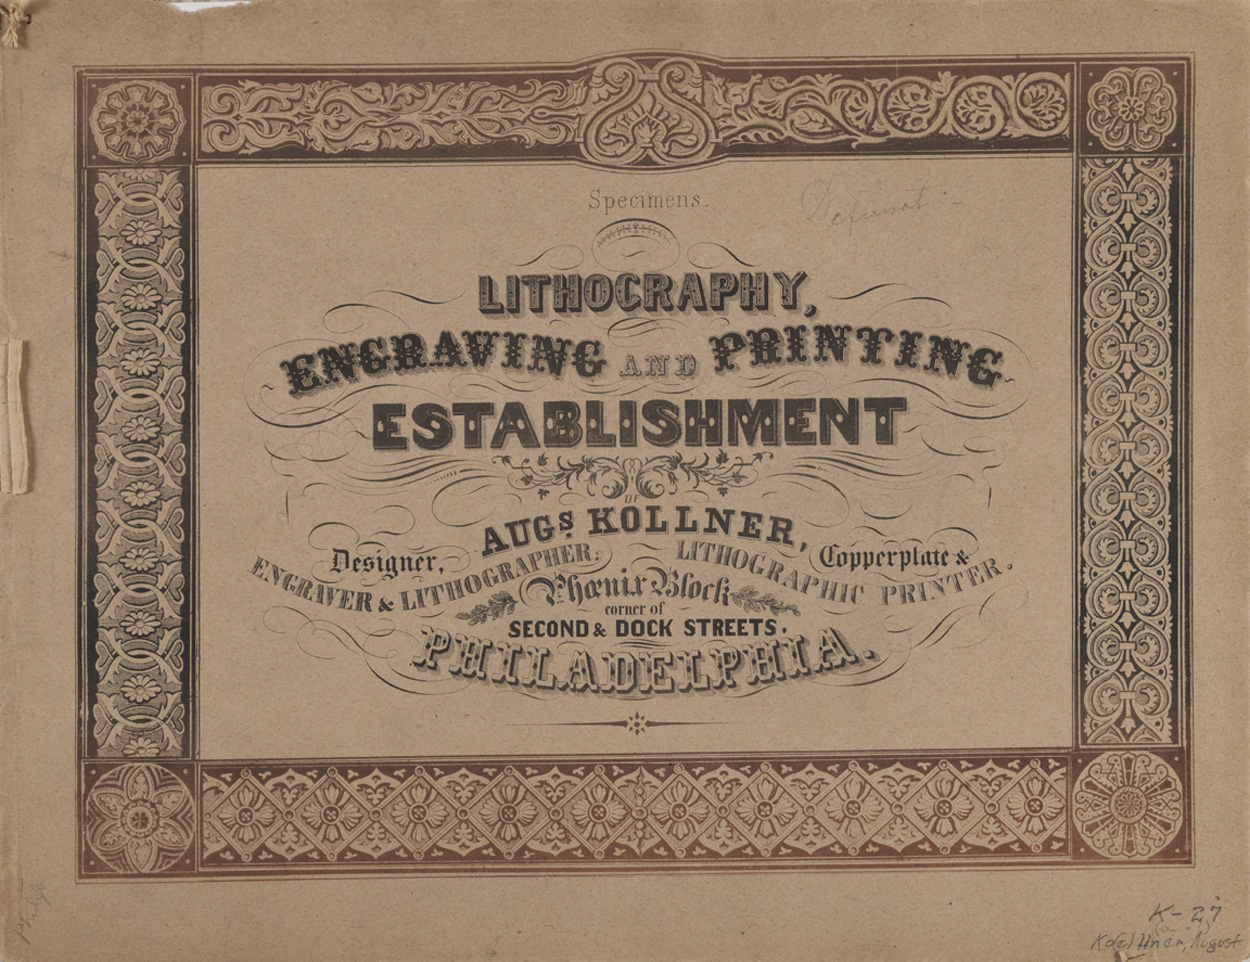 Specimens [of] Lithography, Engraving and Printing [from the] Establishment of Aug[ustu]s Kollner